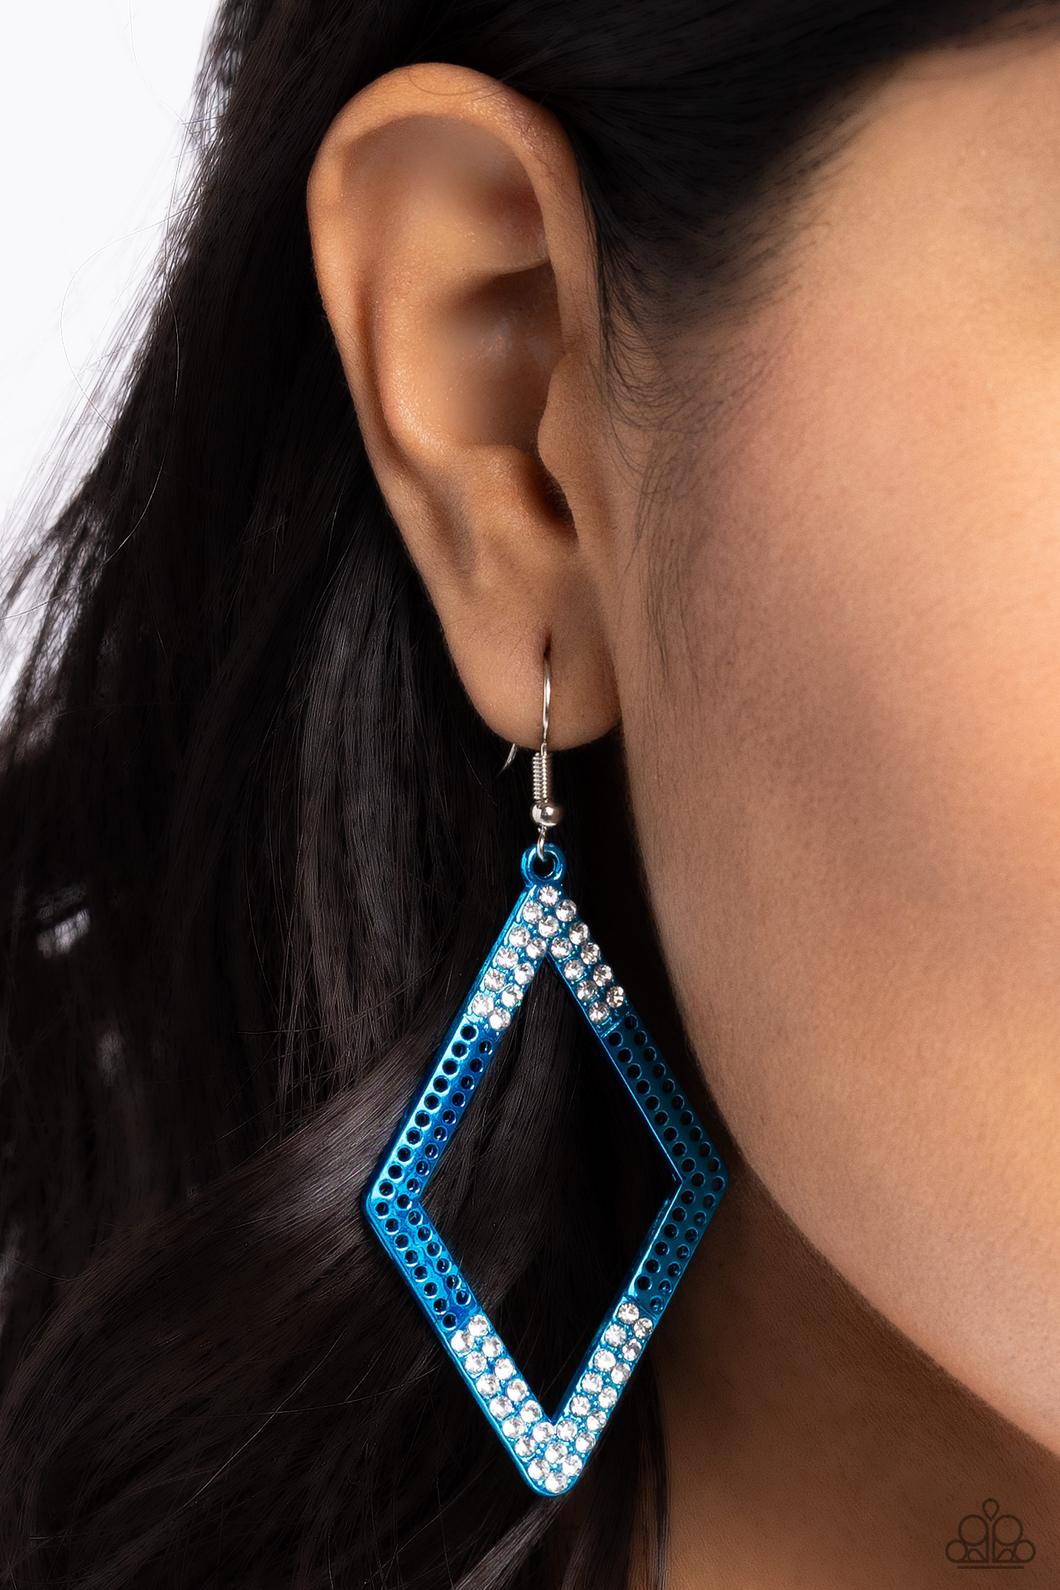 Paparazzi Eloquently Edgy - Blue Earrings